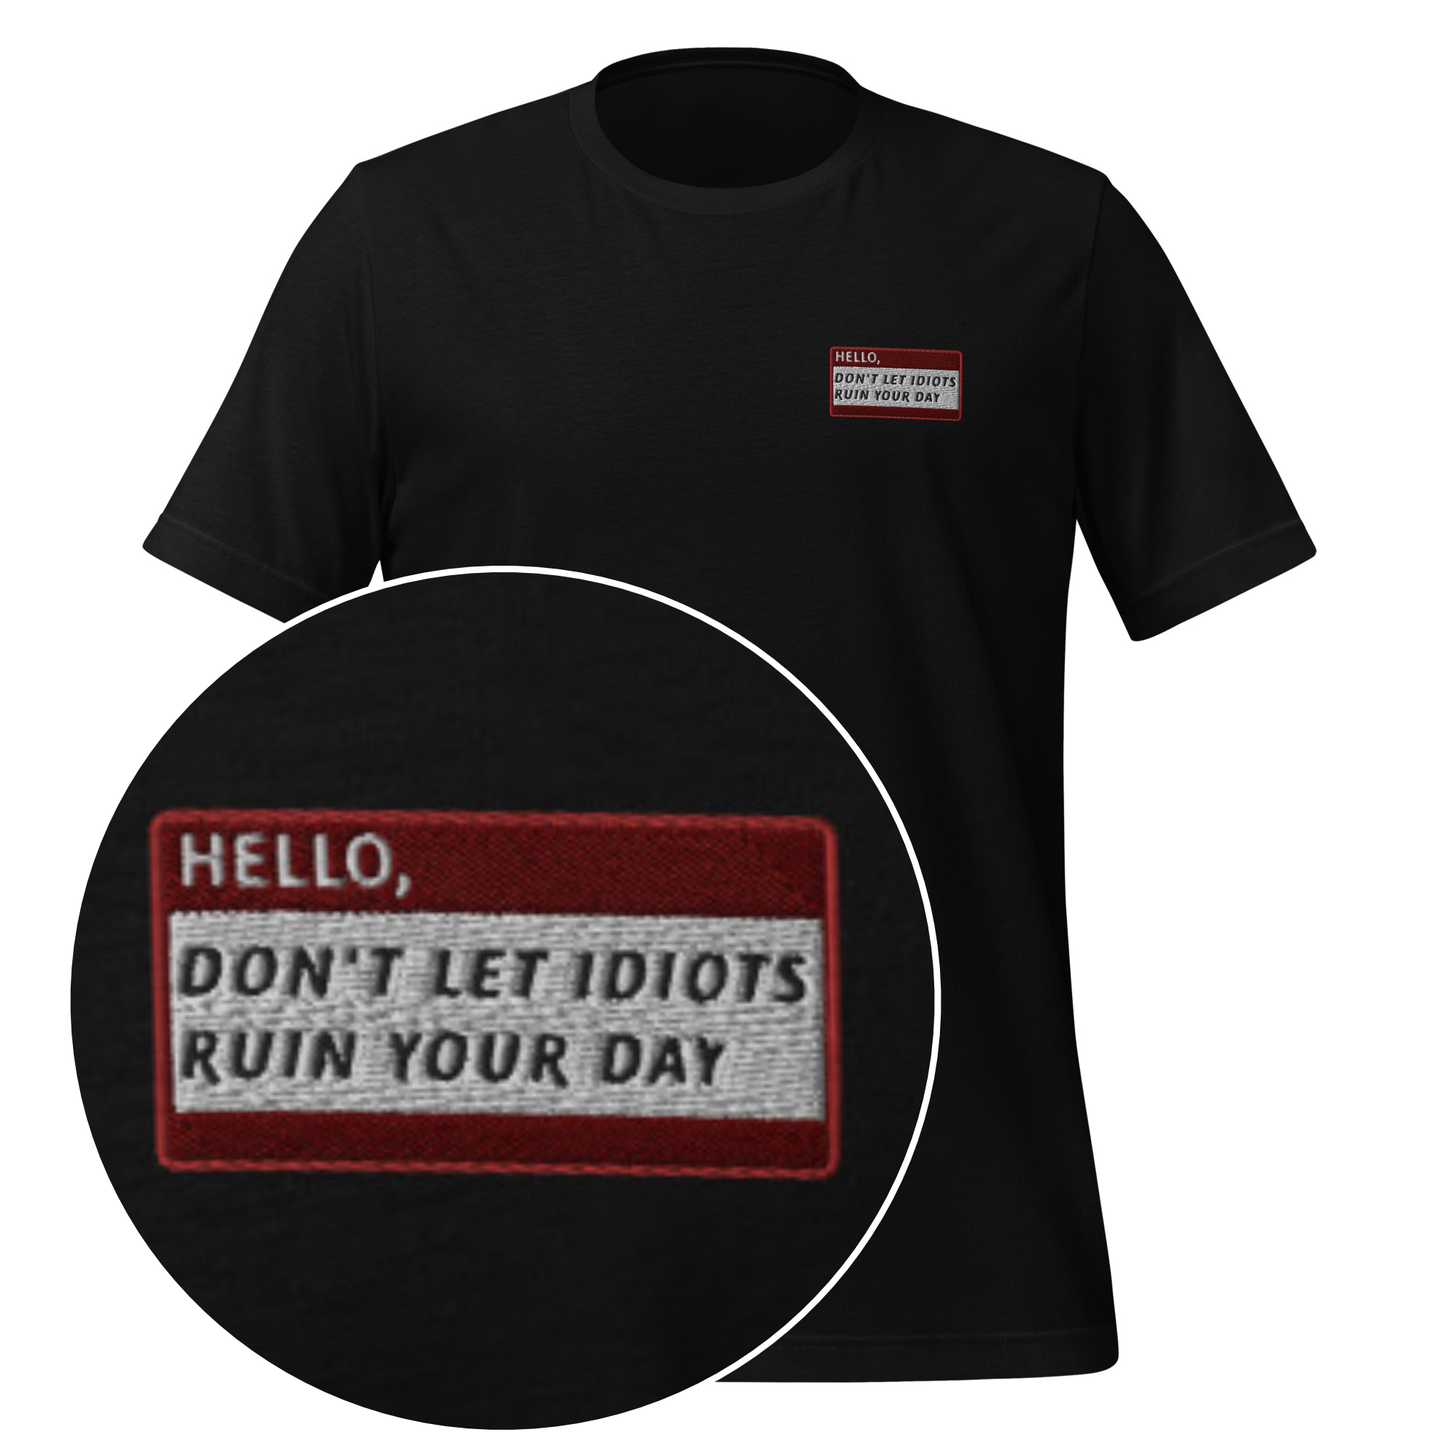 HELLO DON'T LET IDITOS RUIN YOUR DAY - Name Tag T-Shirt